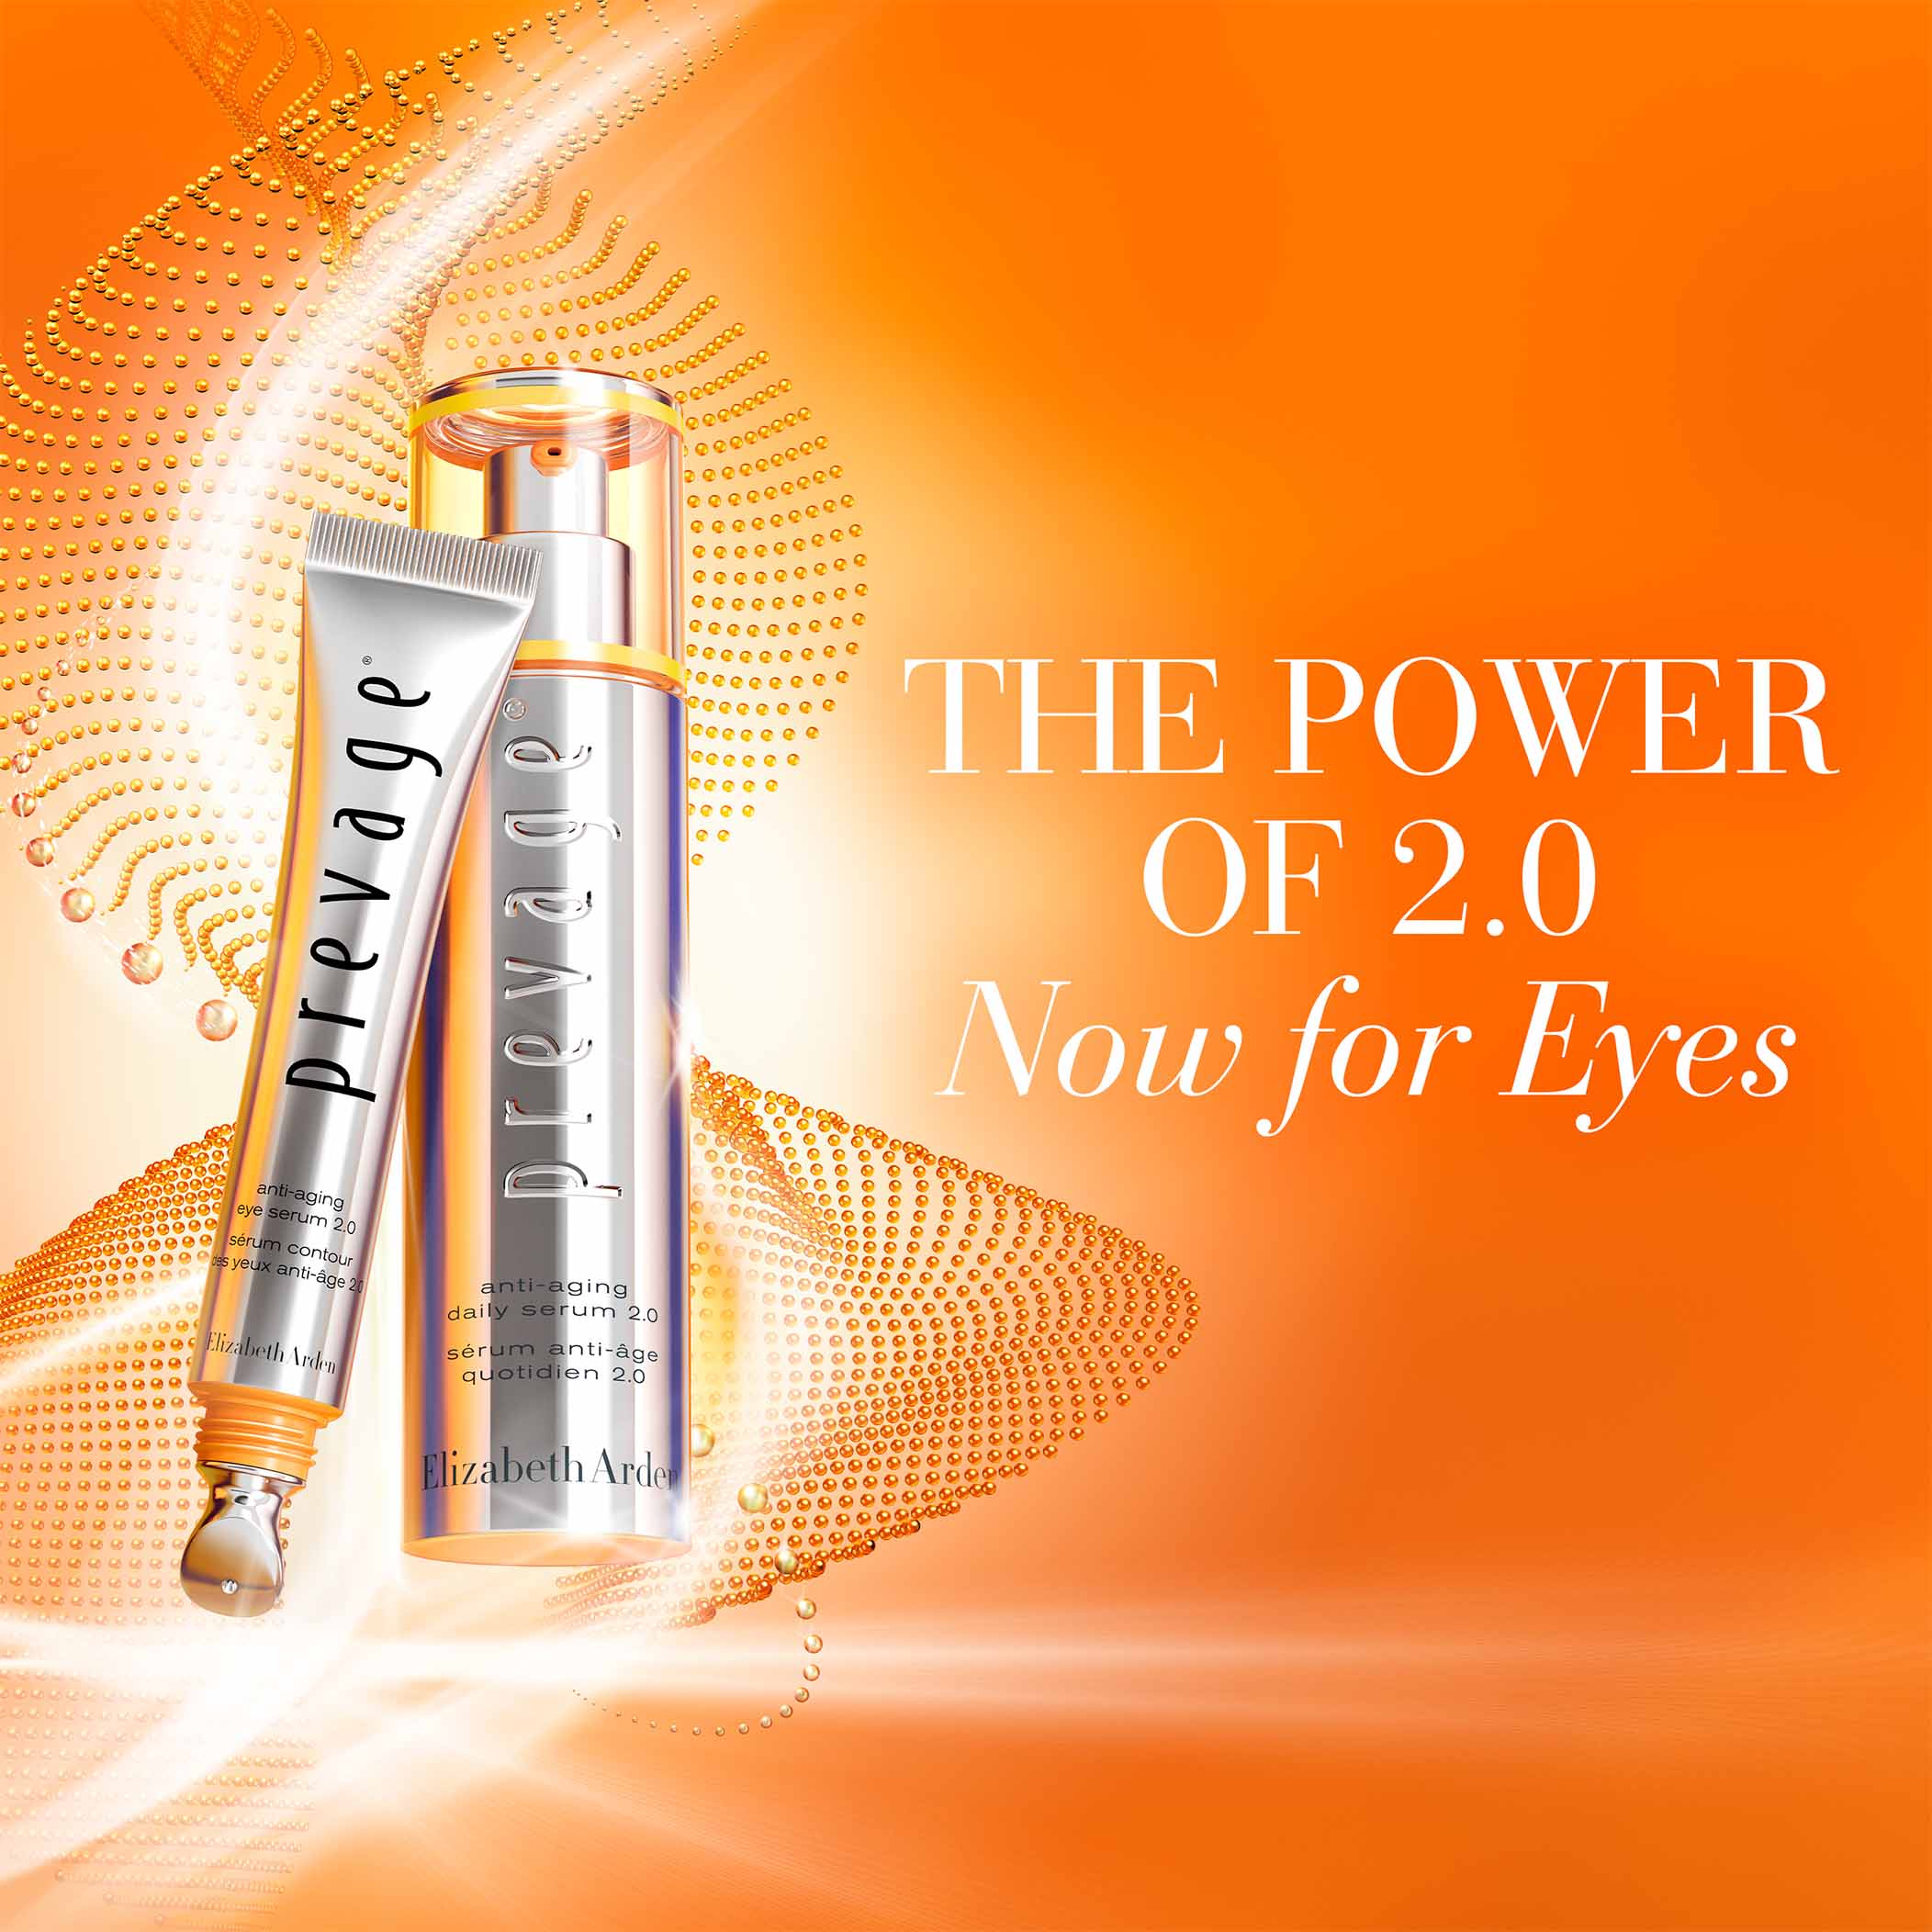 The Prevage Collection- the power of 2.0 now for eyes